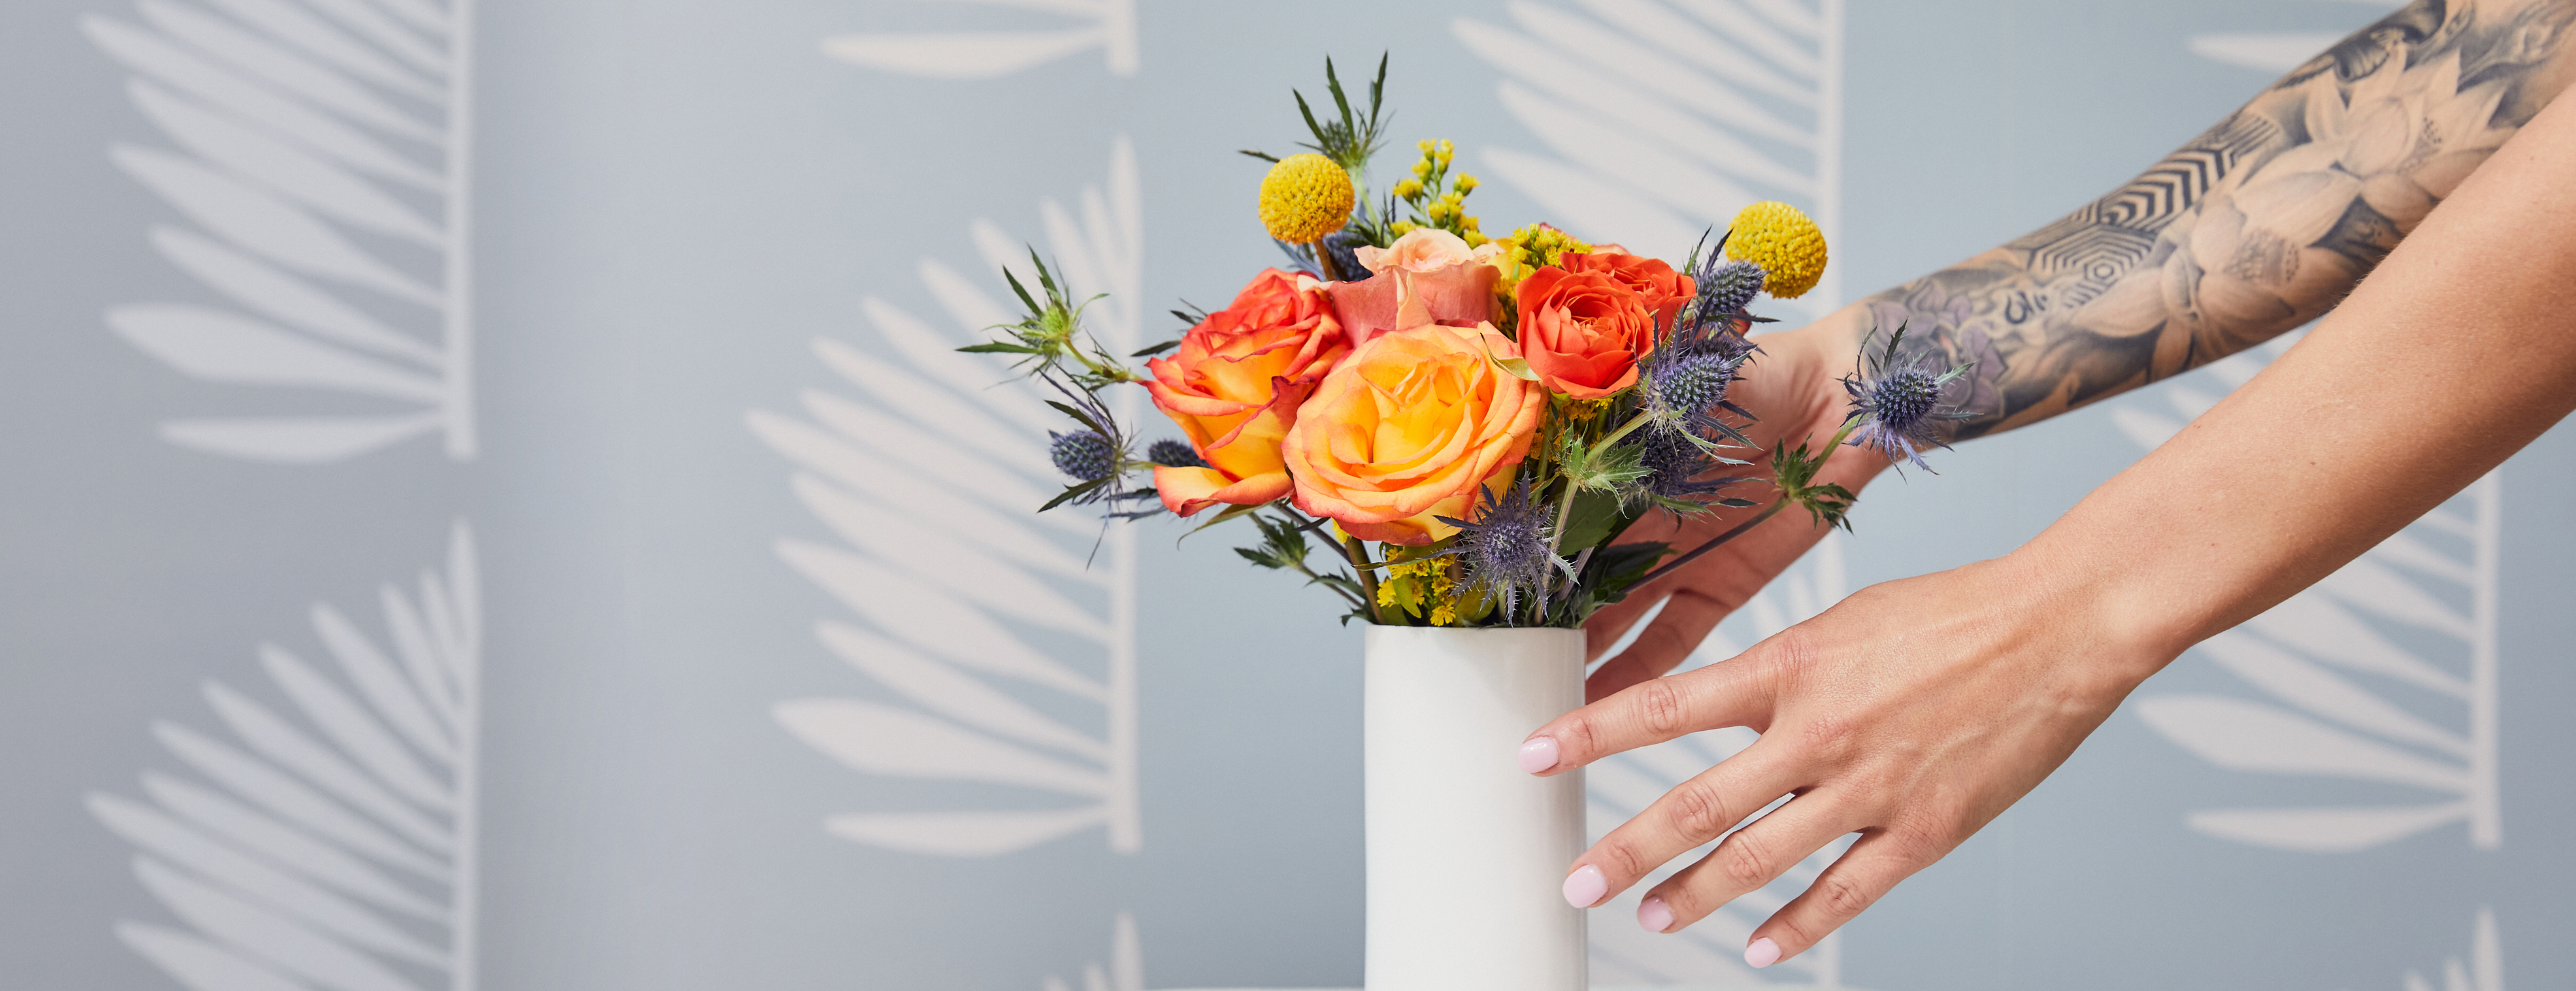 Hands placing a mini flower bouquet in a white vase